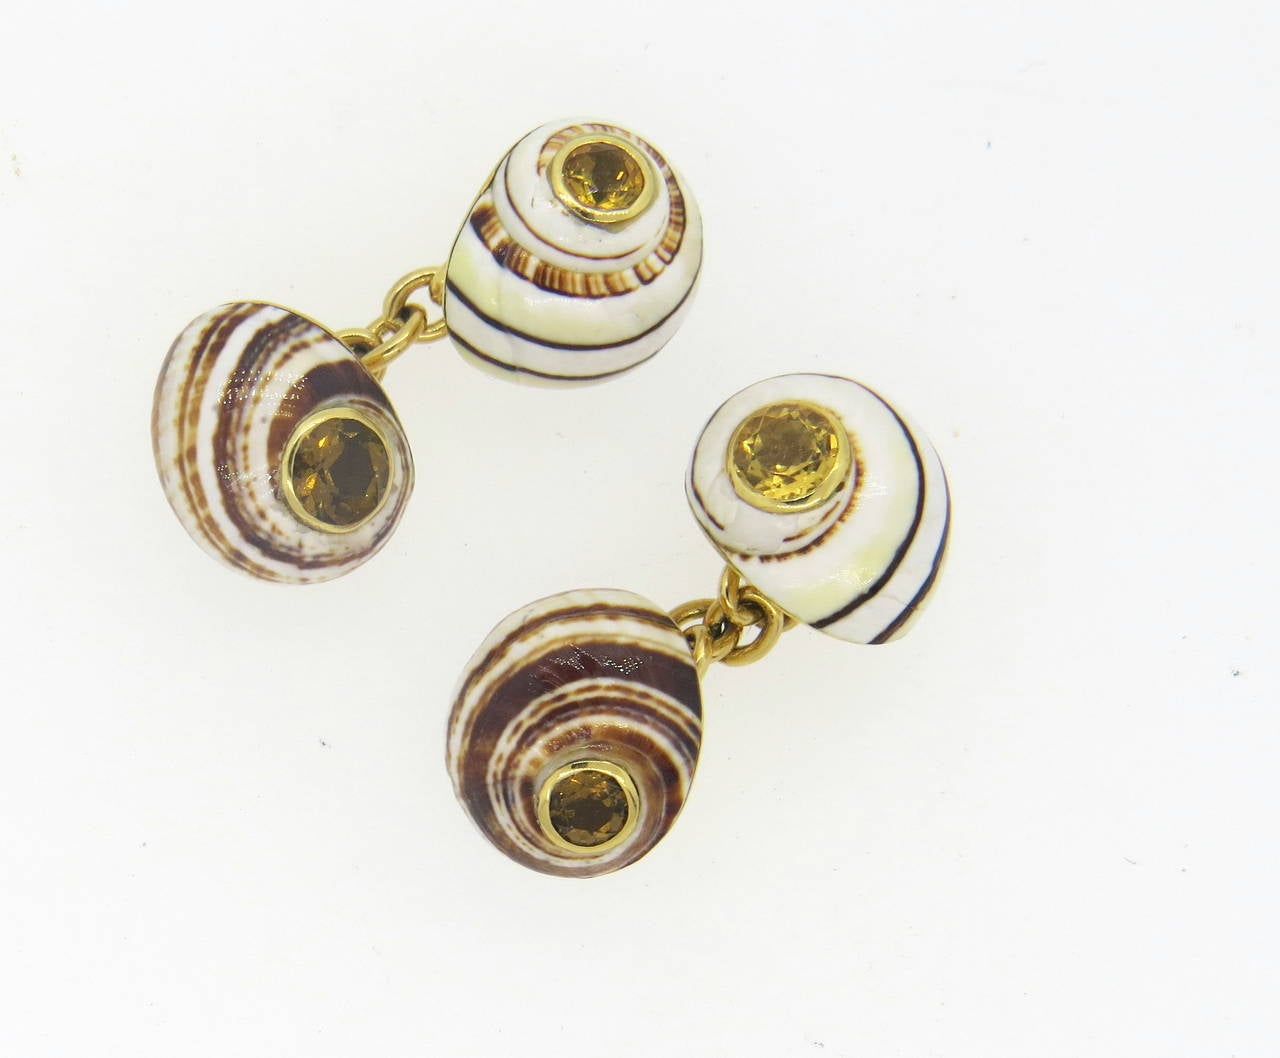 A pair of new 18k yellow gold cufflinks, crafted by Trianon, featuring shell top and citrine gemstones in the center. Each top measures 15mm x 11mm. Marked Trianon, 750 and makers mark. Weight - 8.3 grams
Retail $4200